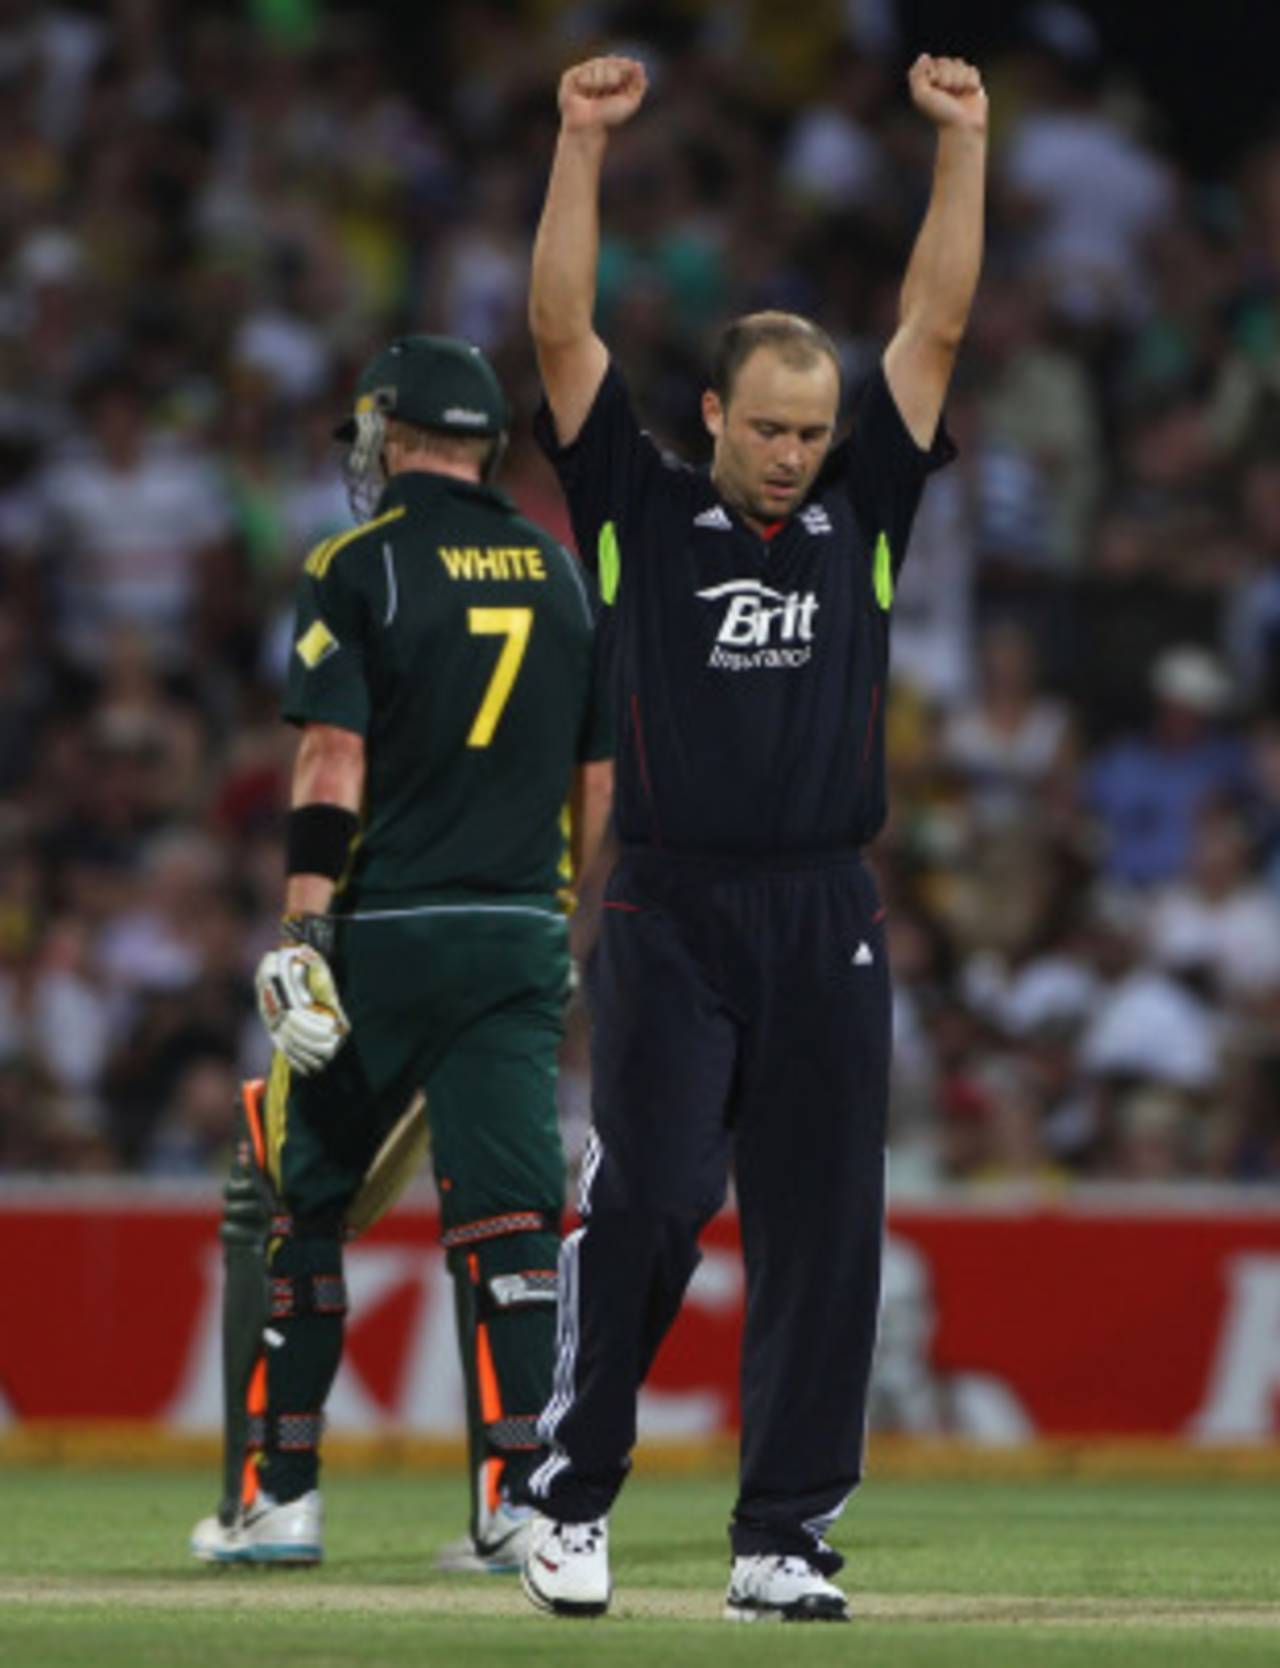 Jonathan Trott chipped in with his maiden ODI wickets, as England pulled the scoreline back to 3-1&nbsp;&nbsp;&bull;&nbsp;&nbsp;Getty Images